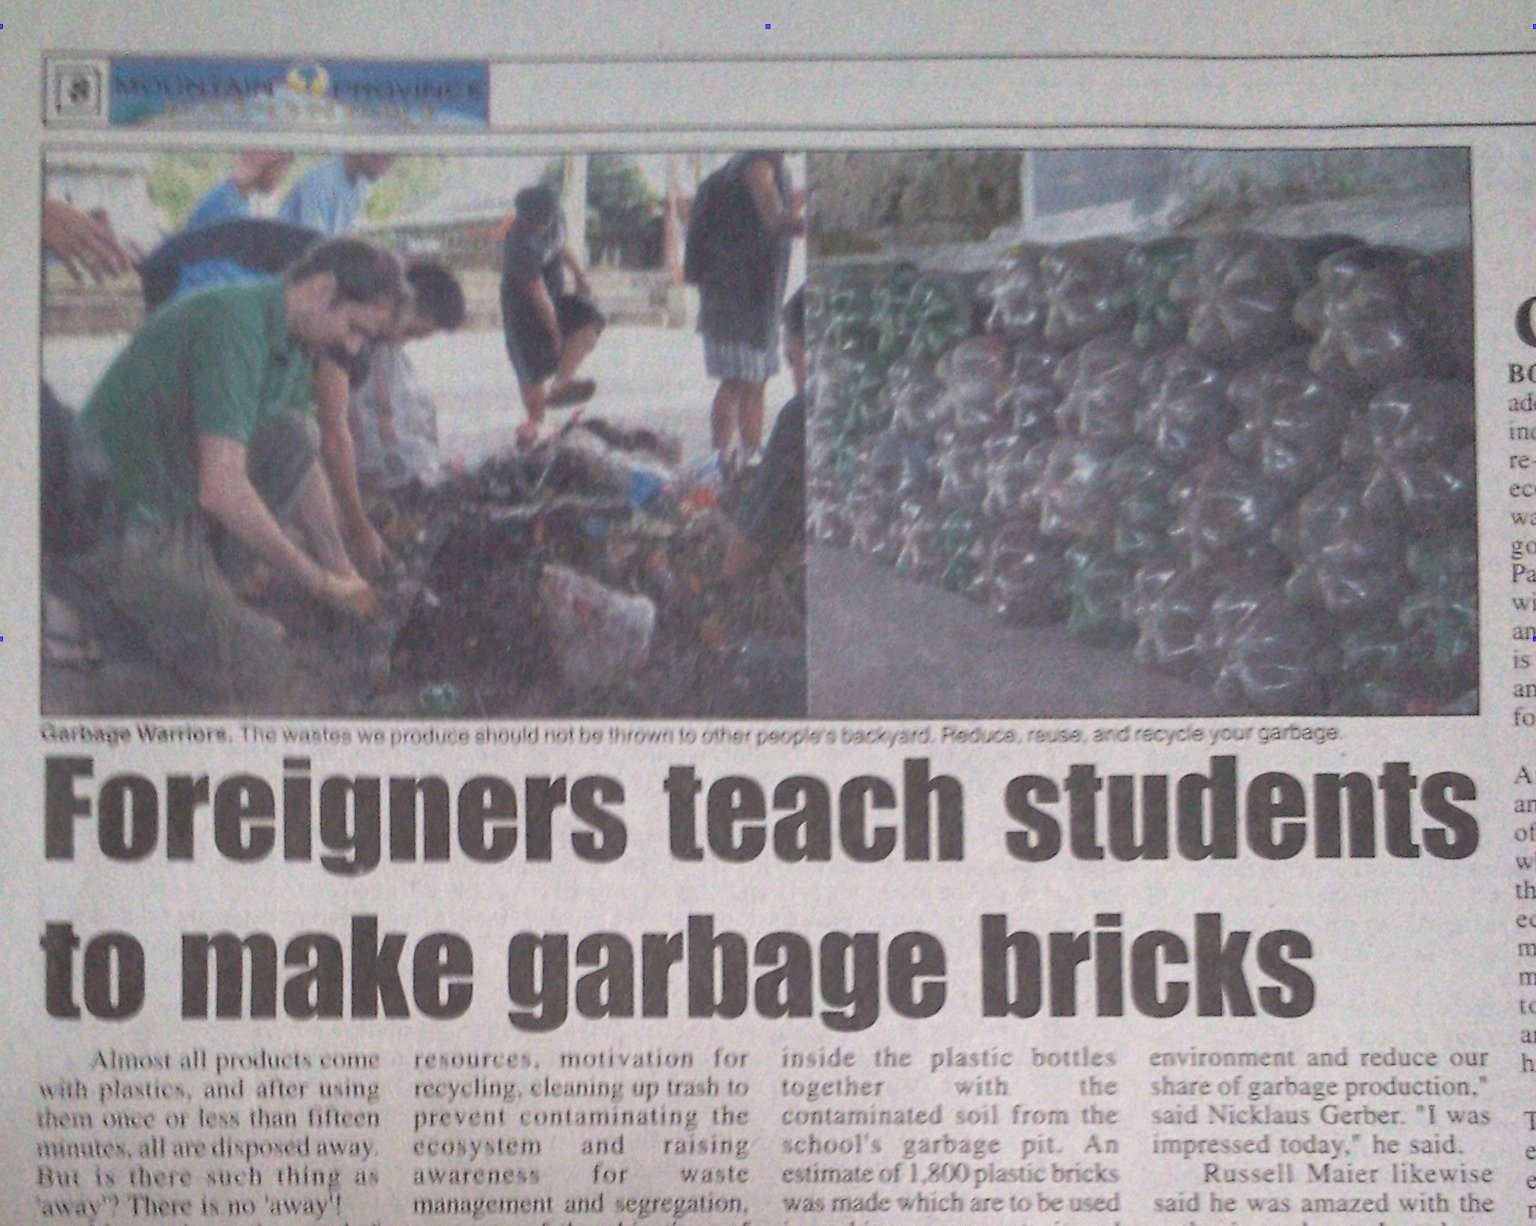 Garbage Heroes – bottle brick making featured in local paper.